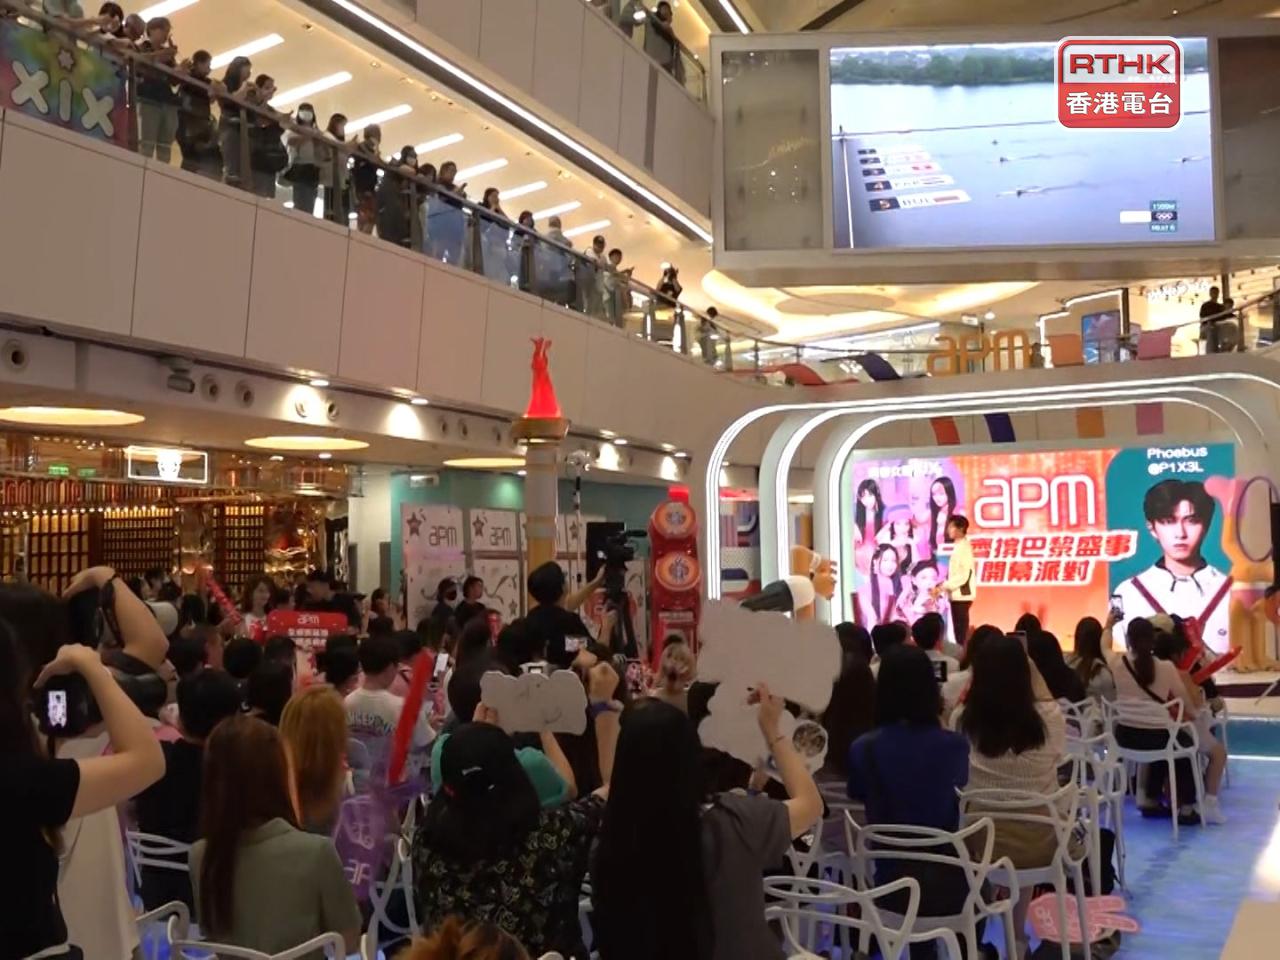 Fans gather at shopping malls for Olympic action